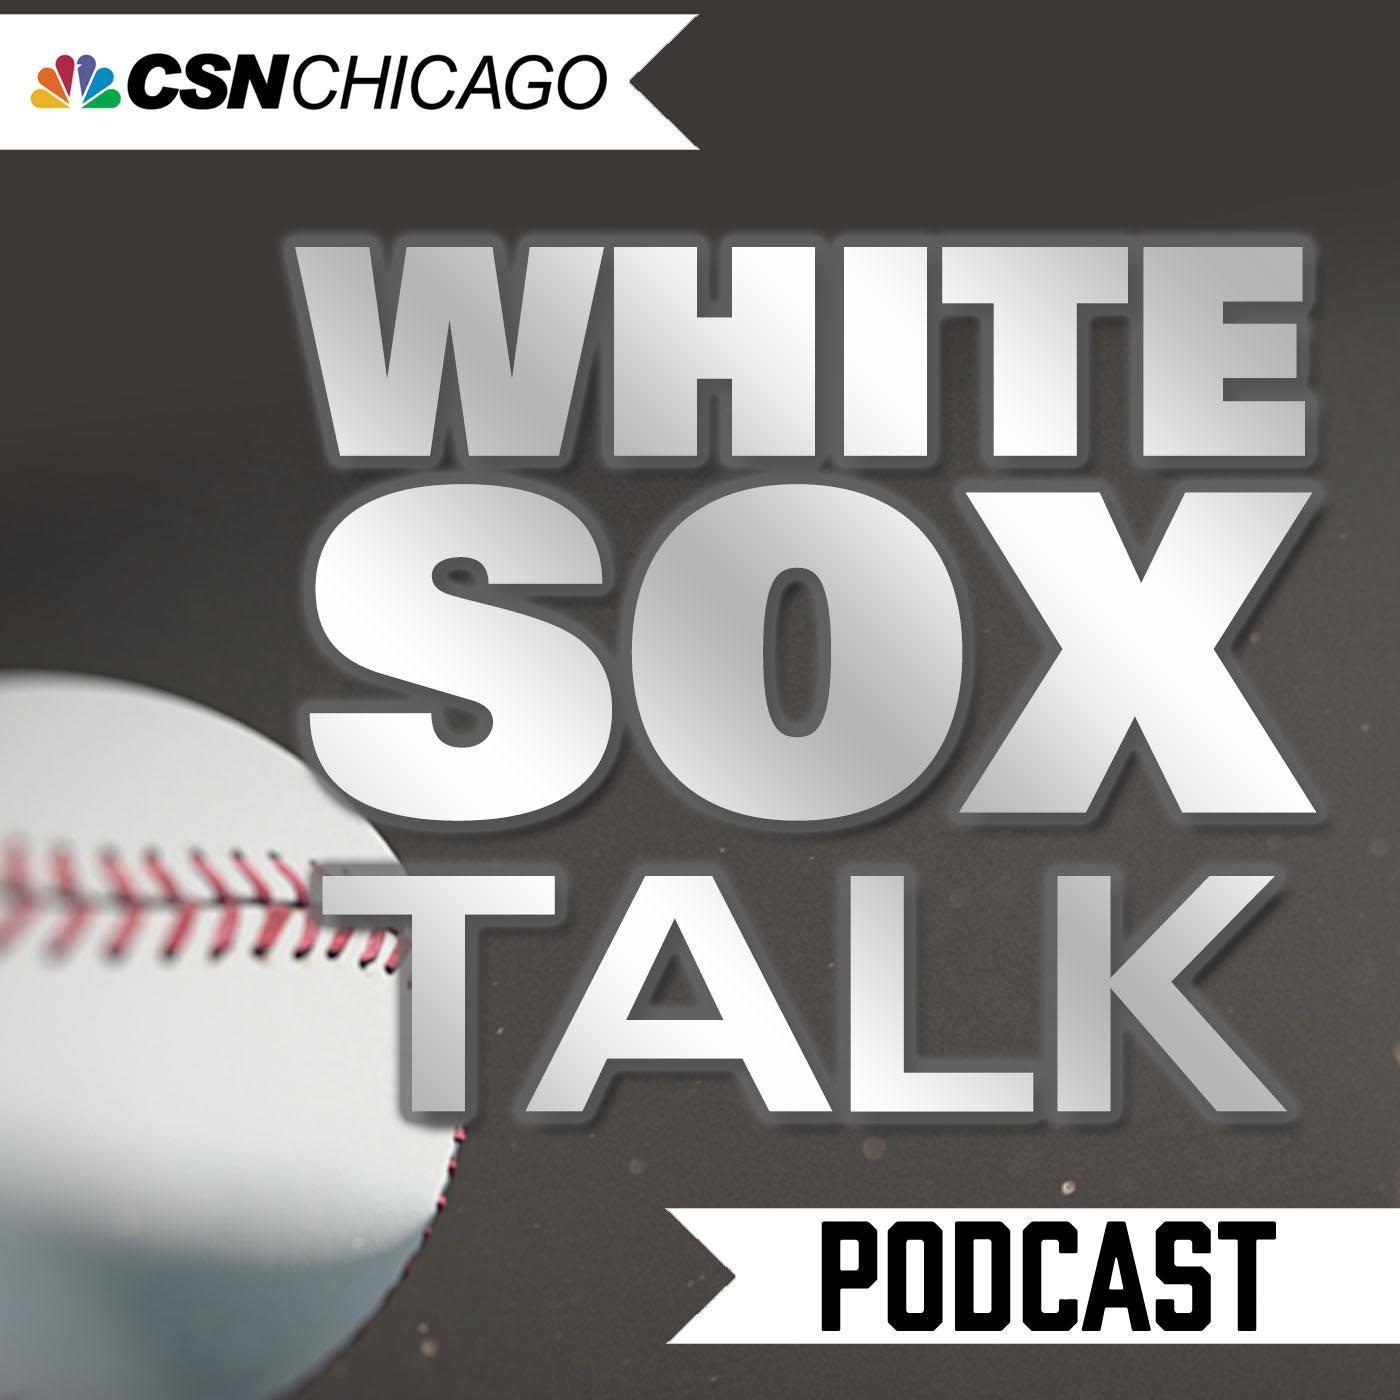 Ep. 1: Will the White Sox trade Chris Sale or Jose Quintana?